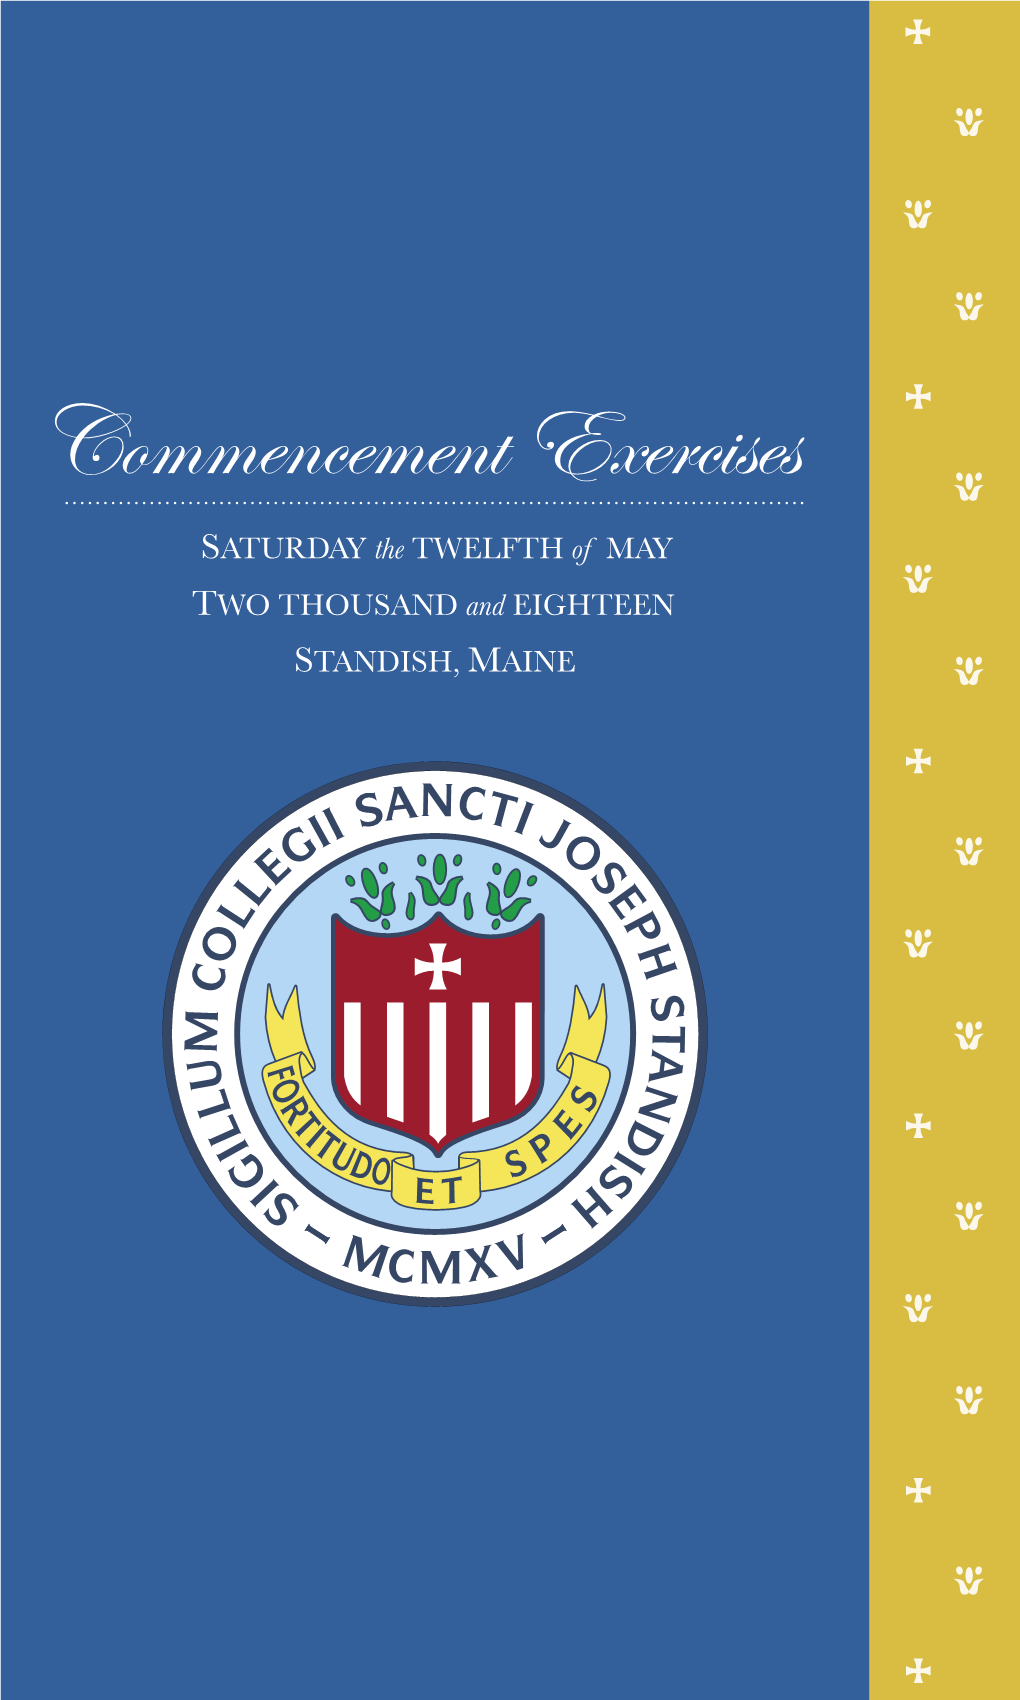 Commencement Exercises SATURDAY the TWELFTH of MAY TWO THOUSAND and EIGHTEEN STANDISH, MAINE